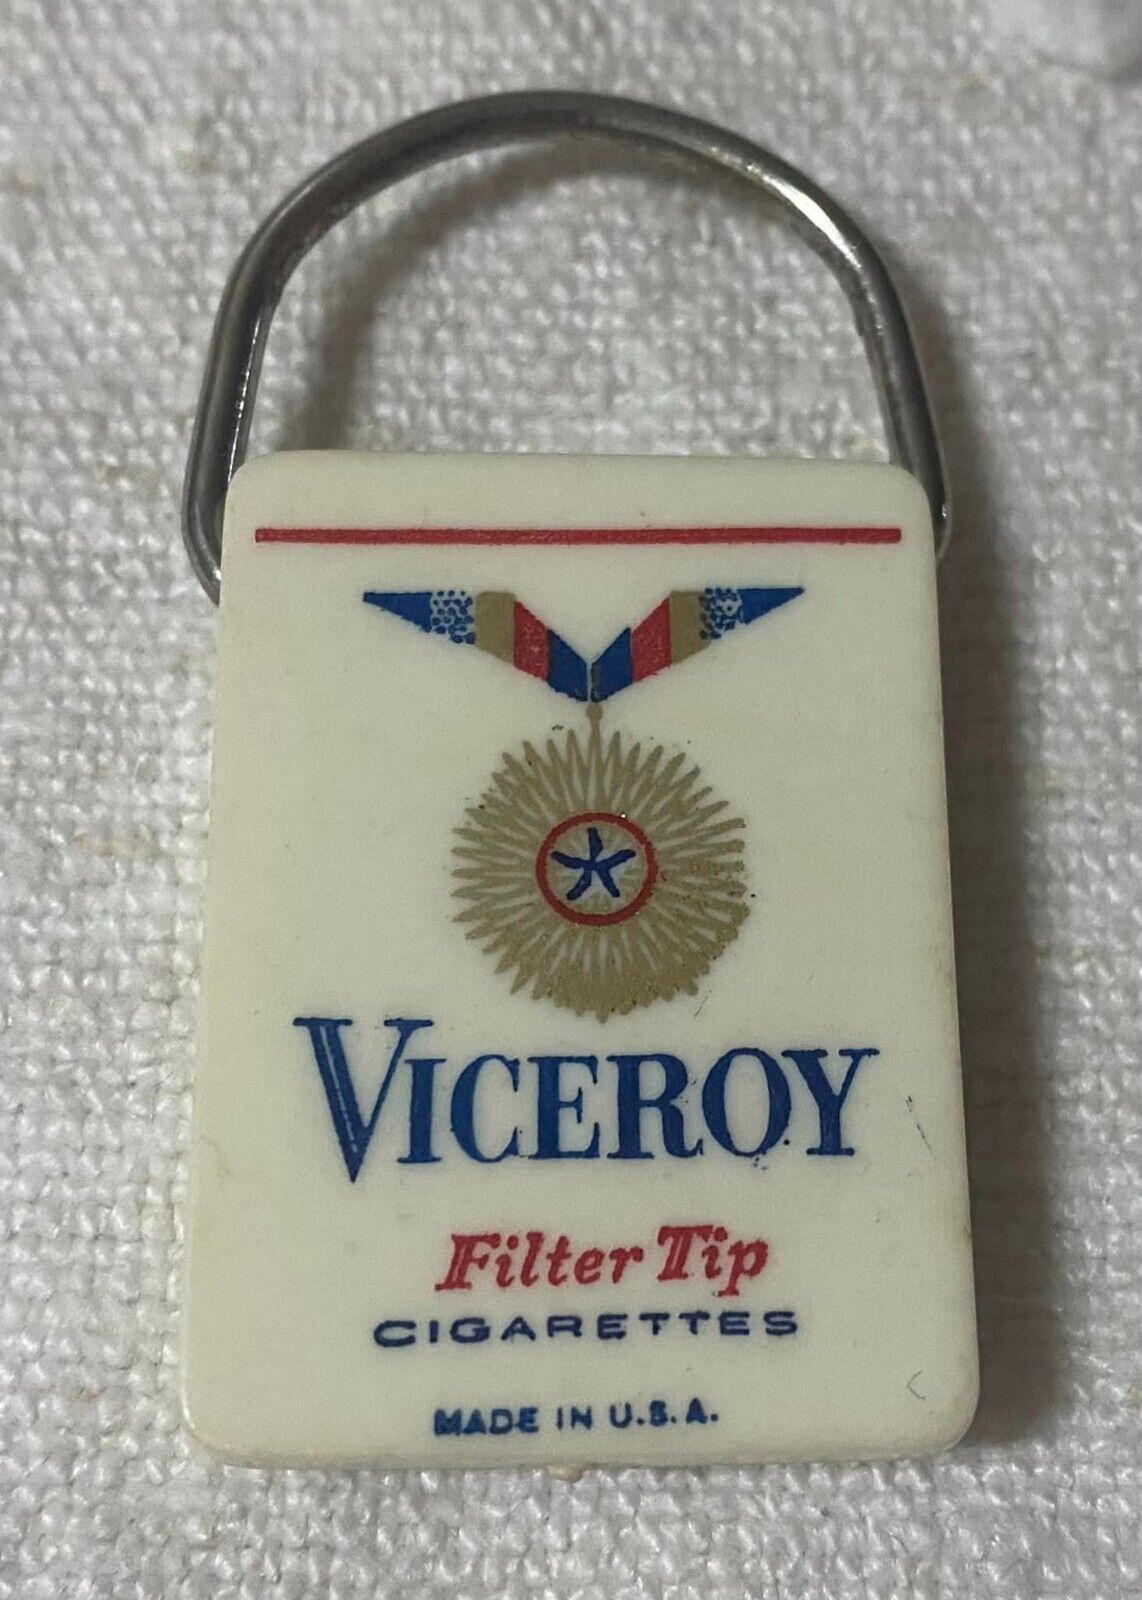 Vintage 50s Viceroy Filter Tip Cigarettes Advertising Premium Keychain Fob Tag